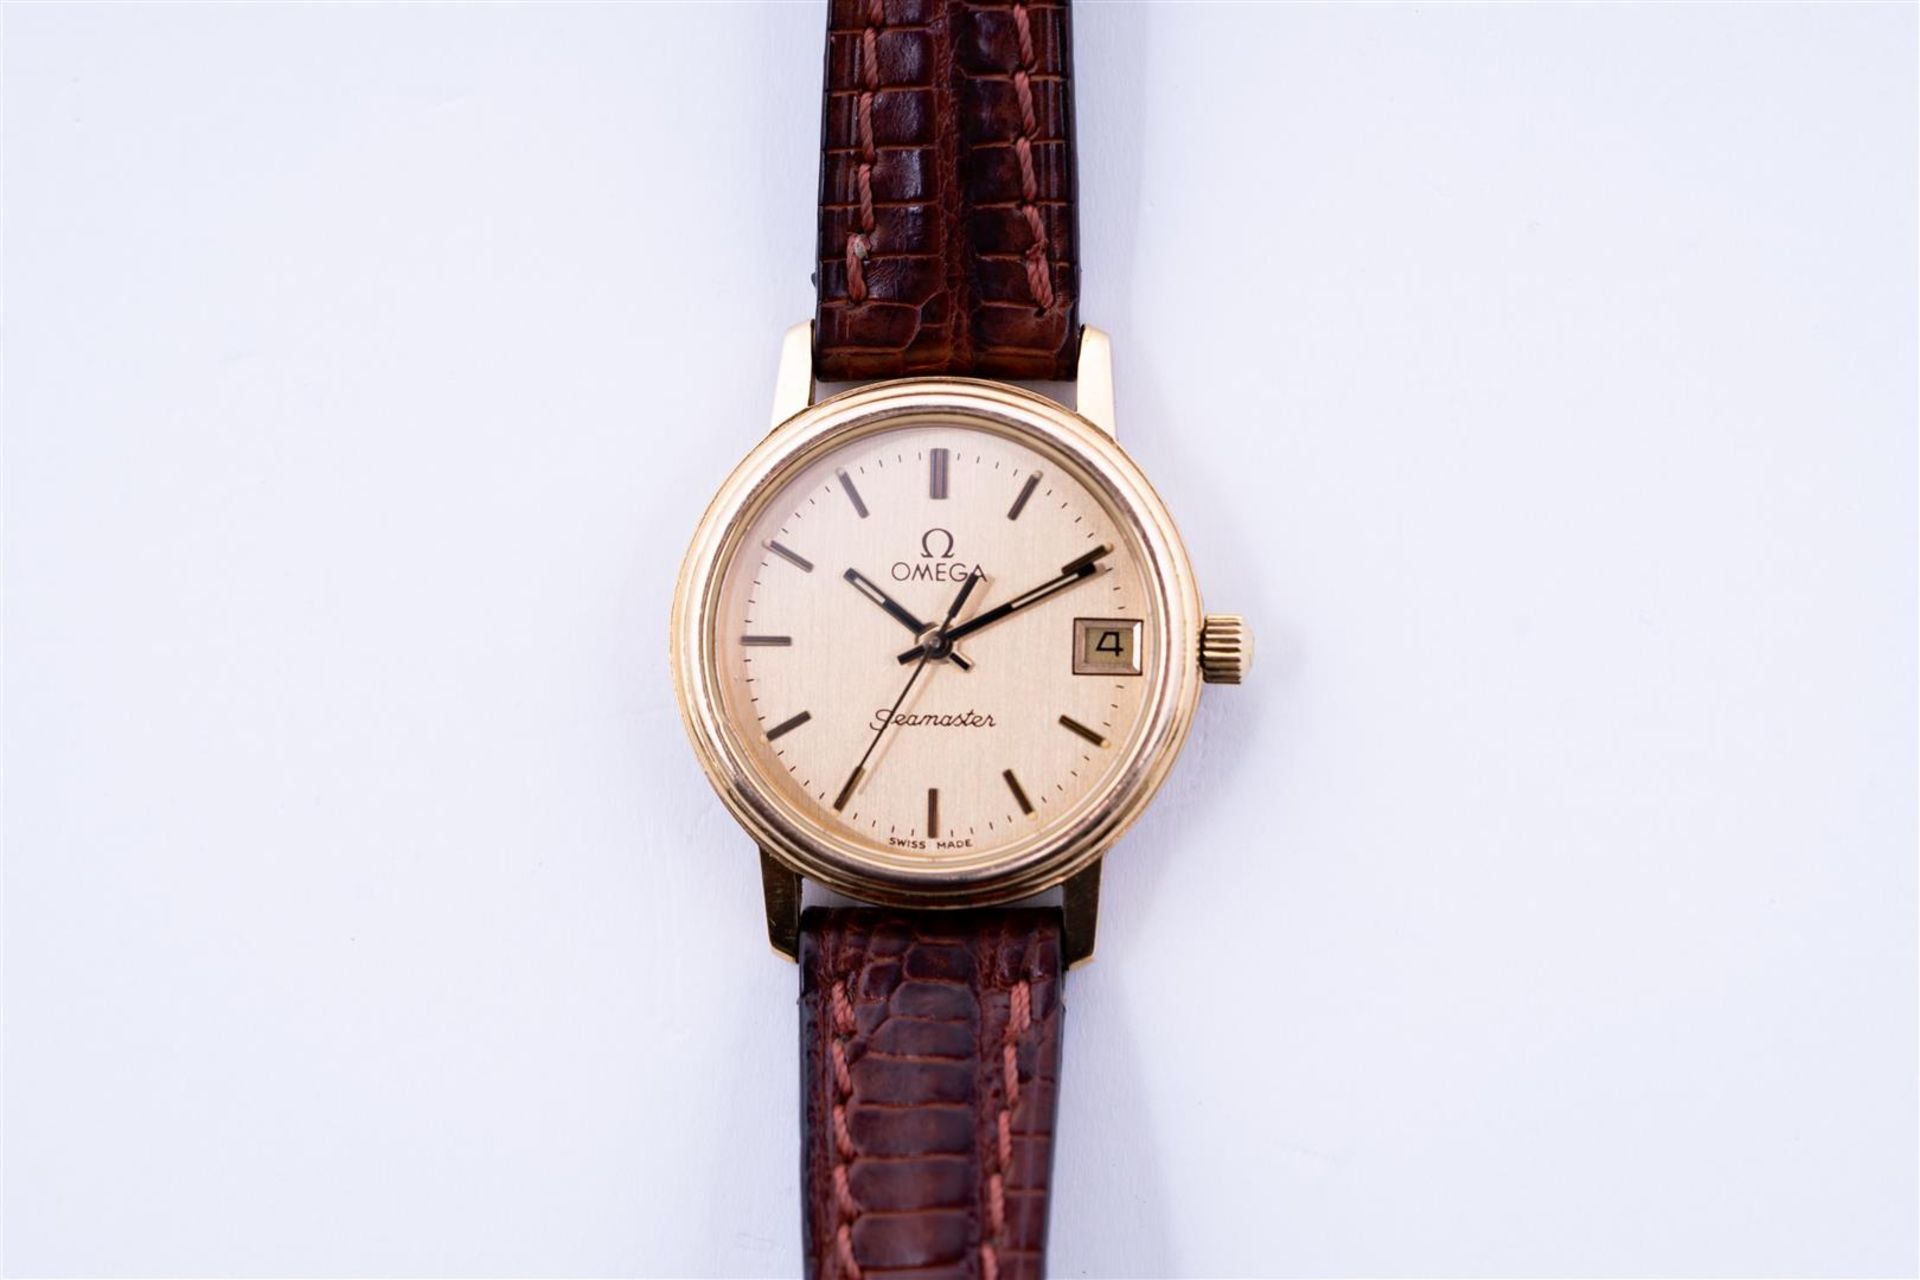 Omega Seamaster ladies watch with gold/champagne color dial.
Gold-plated crown, case and bezel.
Numb - Bild 3 aus 4